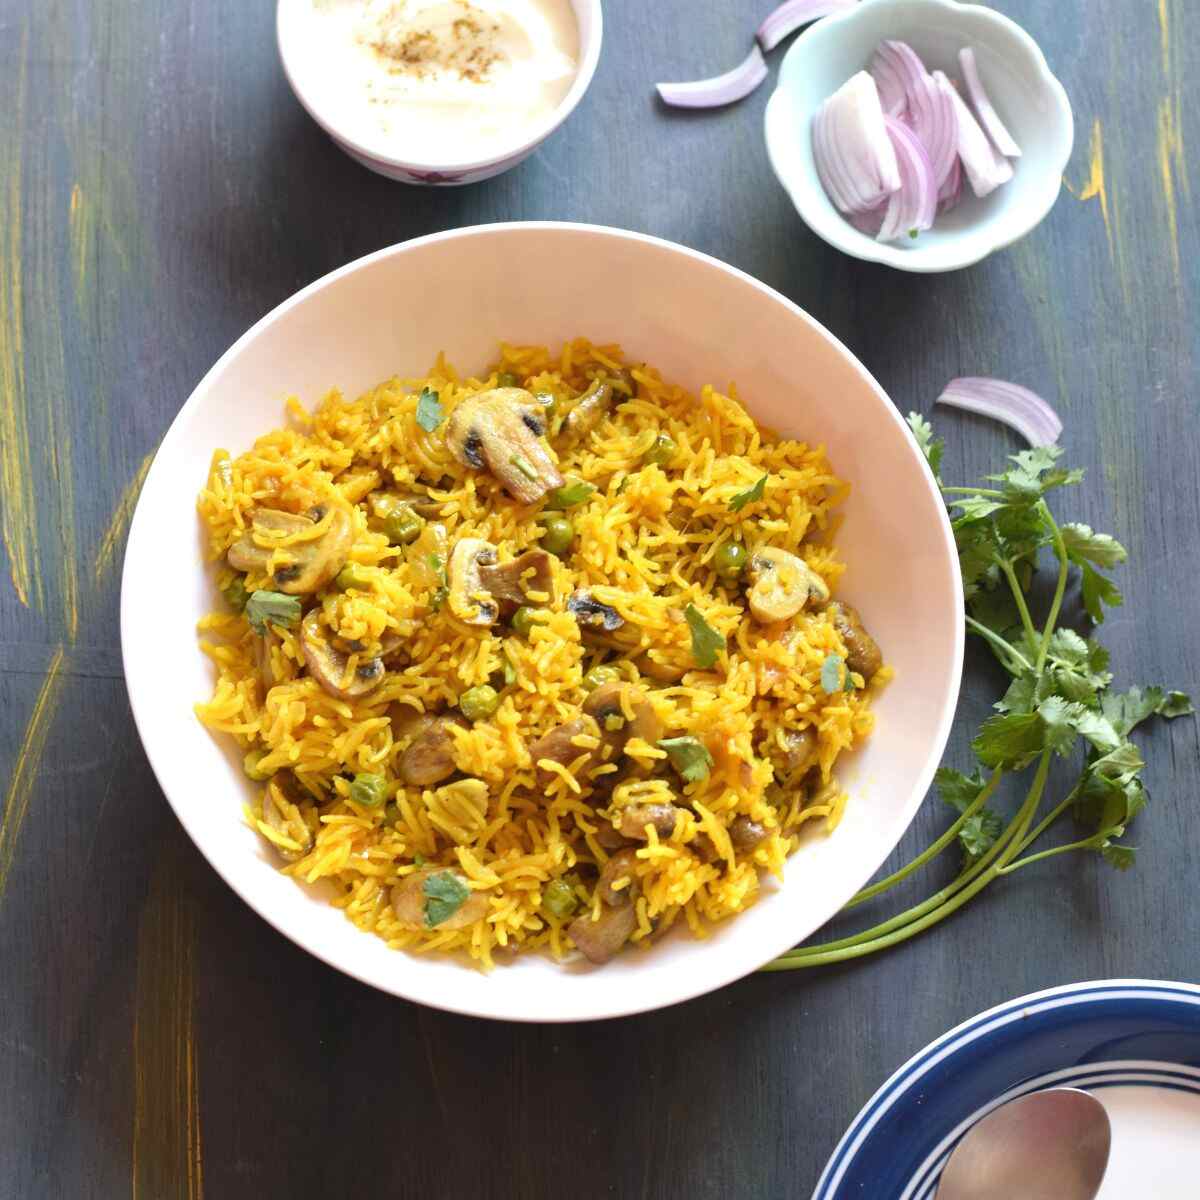 mushroom pilau rice in a bowl along with sliced onions, coriander leaves and a bowl of curd